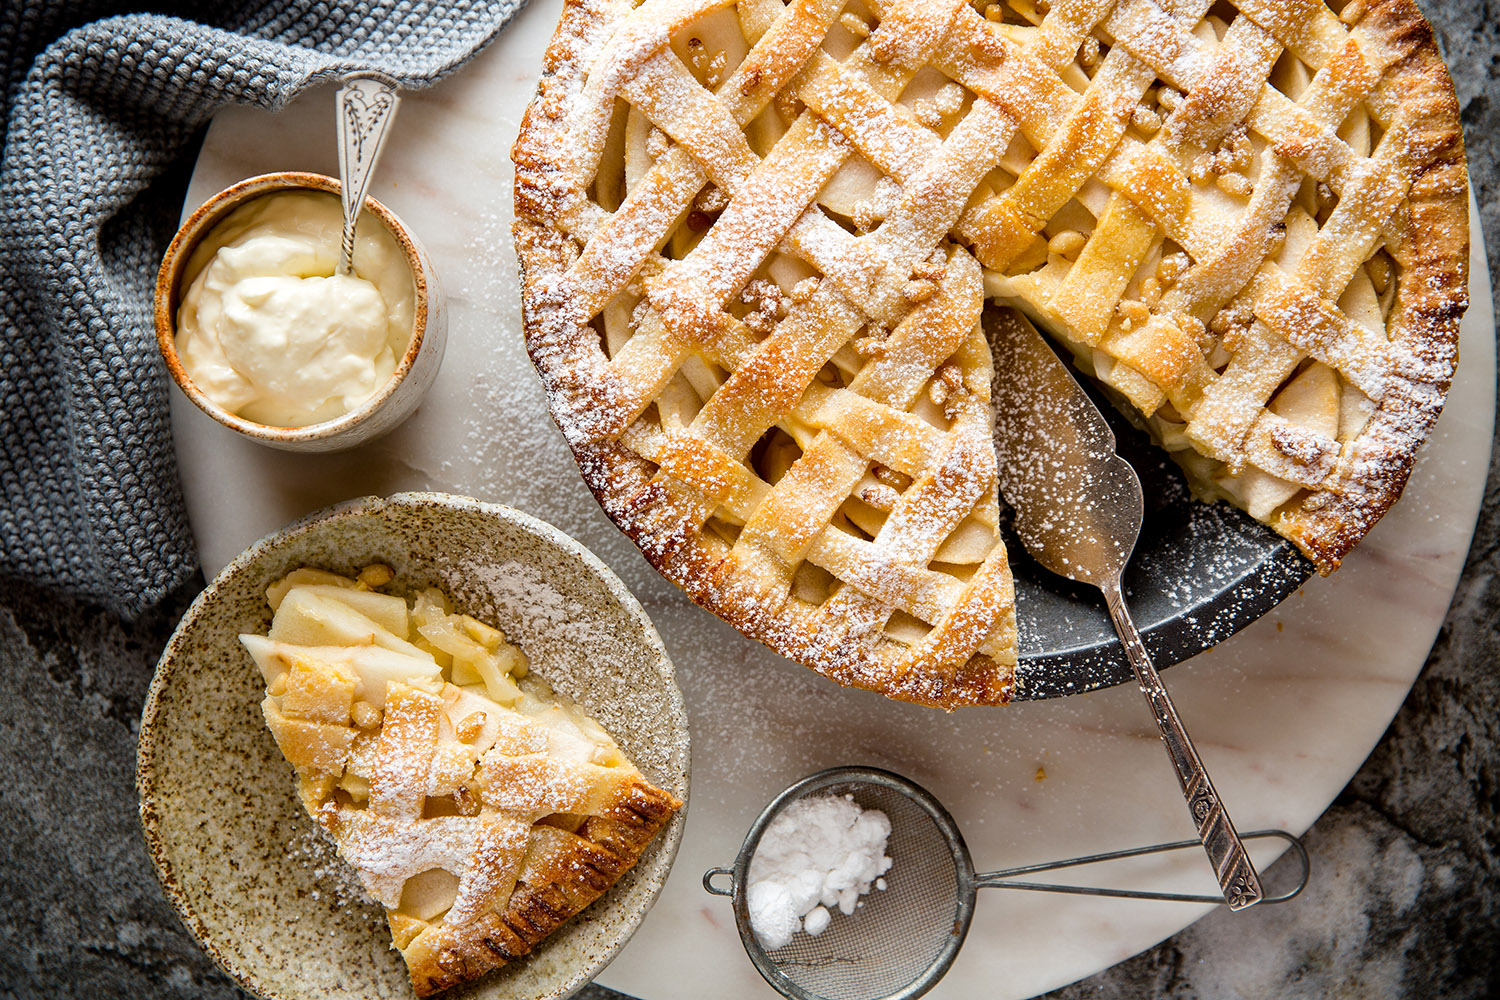 Let’s See What Your Food IQ Is – Can You Get 80% On This Quiz? Apple pie and clotted cream